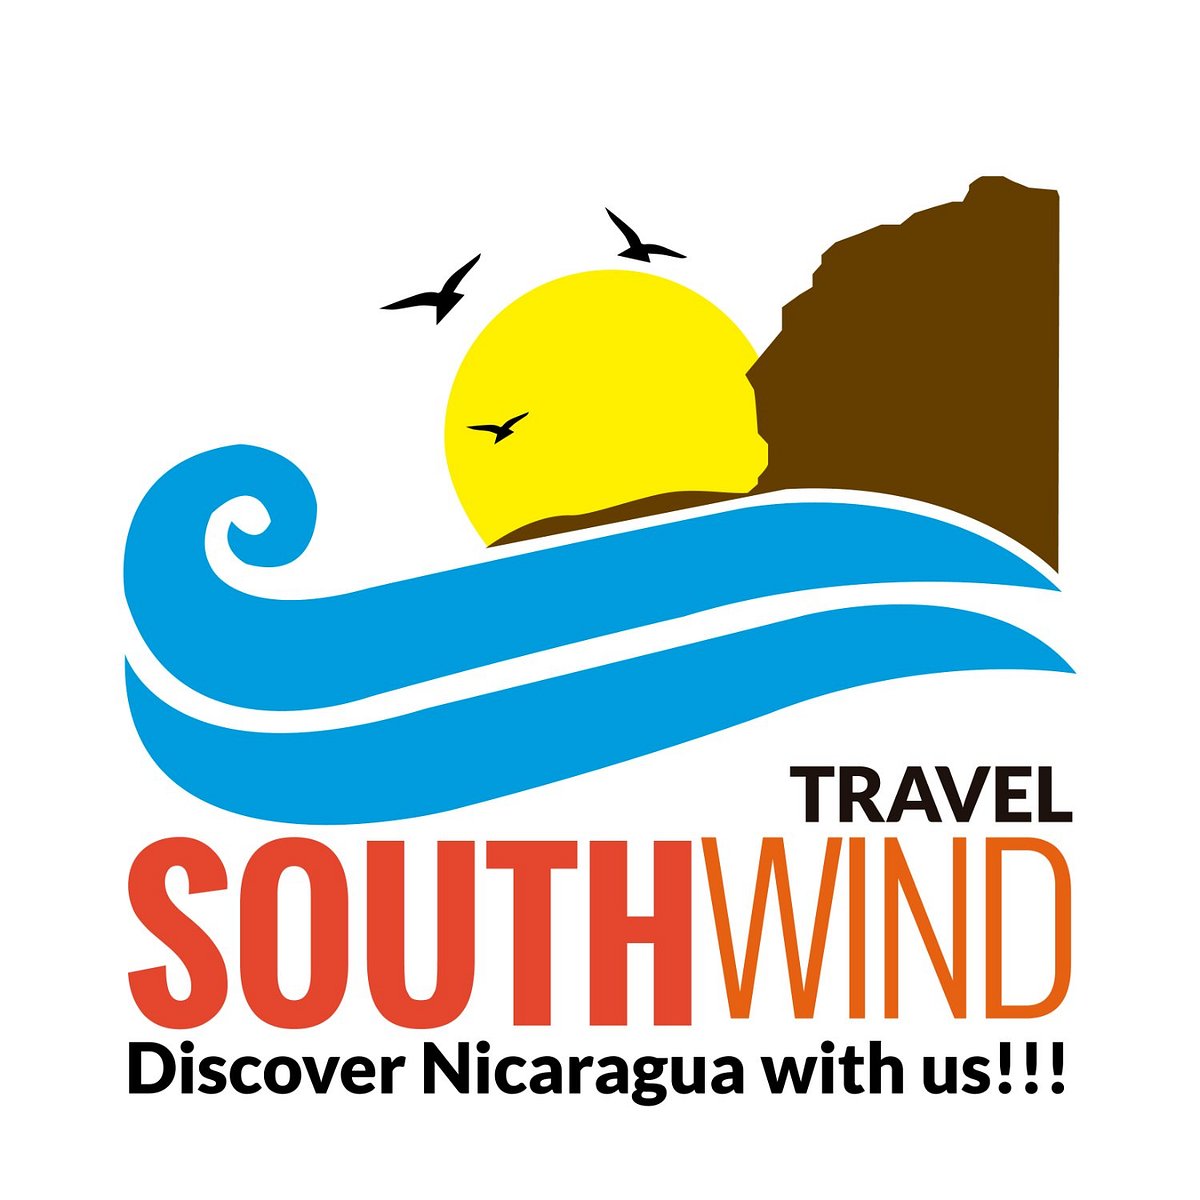 south wind travel